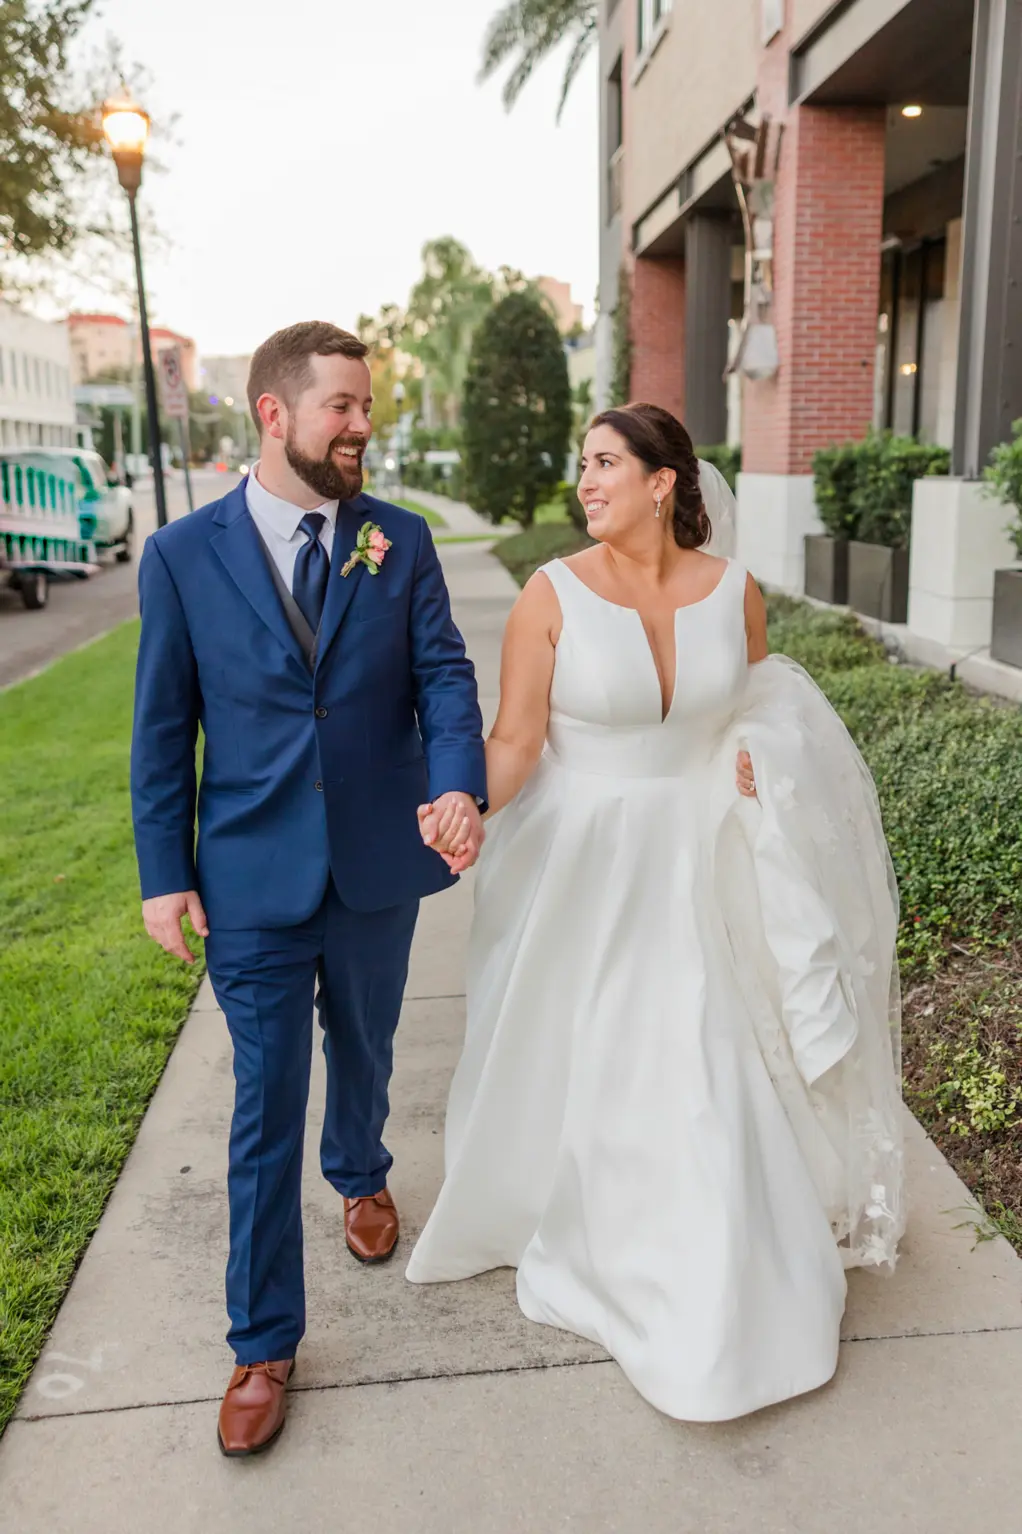 Classic Deep V Boatneck Stella York Ballgown Wedding Dress Inspiration | Bride and Groom Just Married Wedding Portrait | Tampa Bay Photographer Mary Anna Photography